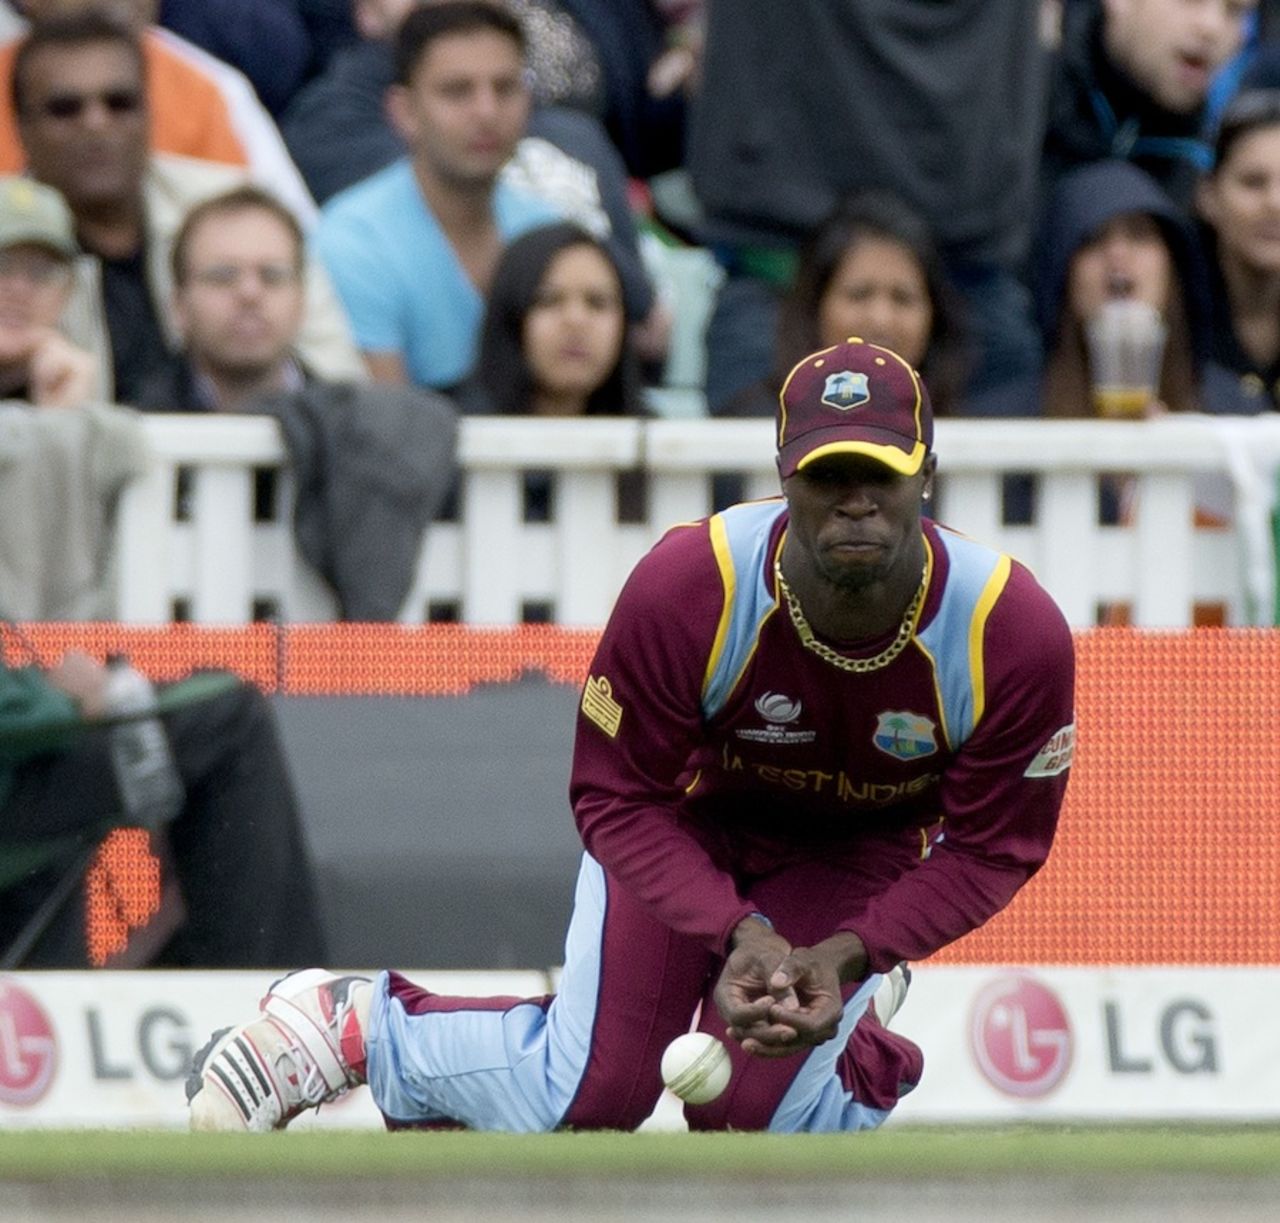 Kemar Roach spills a catch near the boundary, India v West Indies, Champions Trophy, Group B, The Oval, June 11, 2013